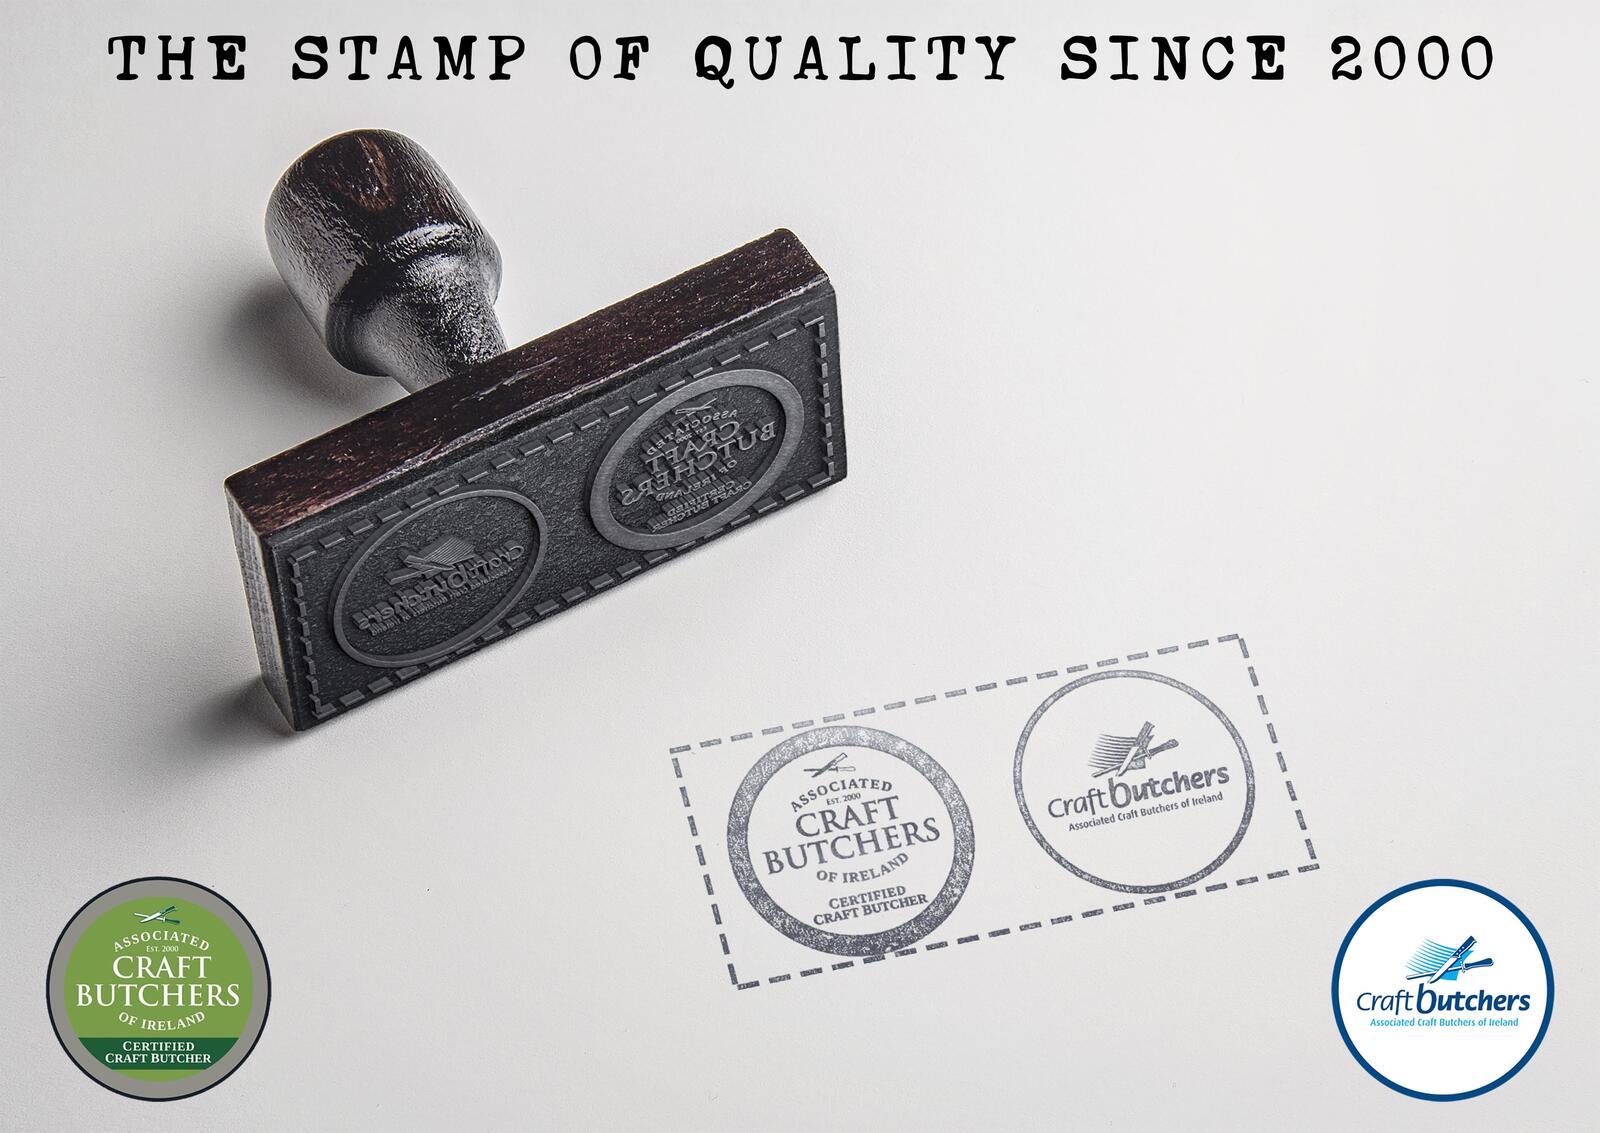 The stamp of quality